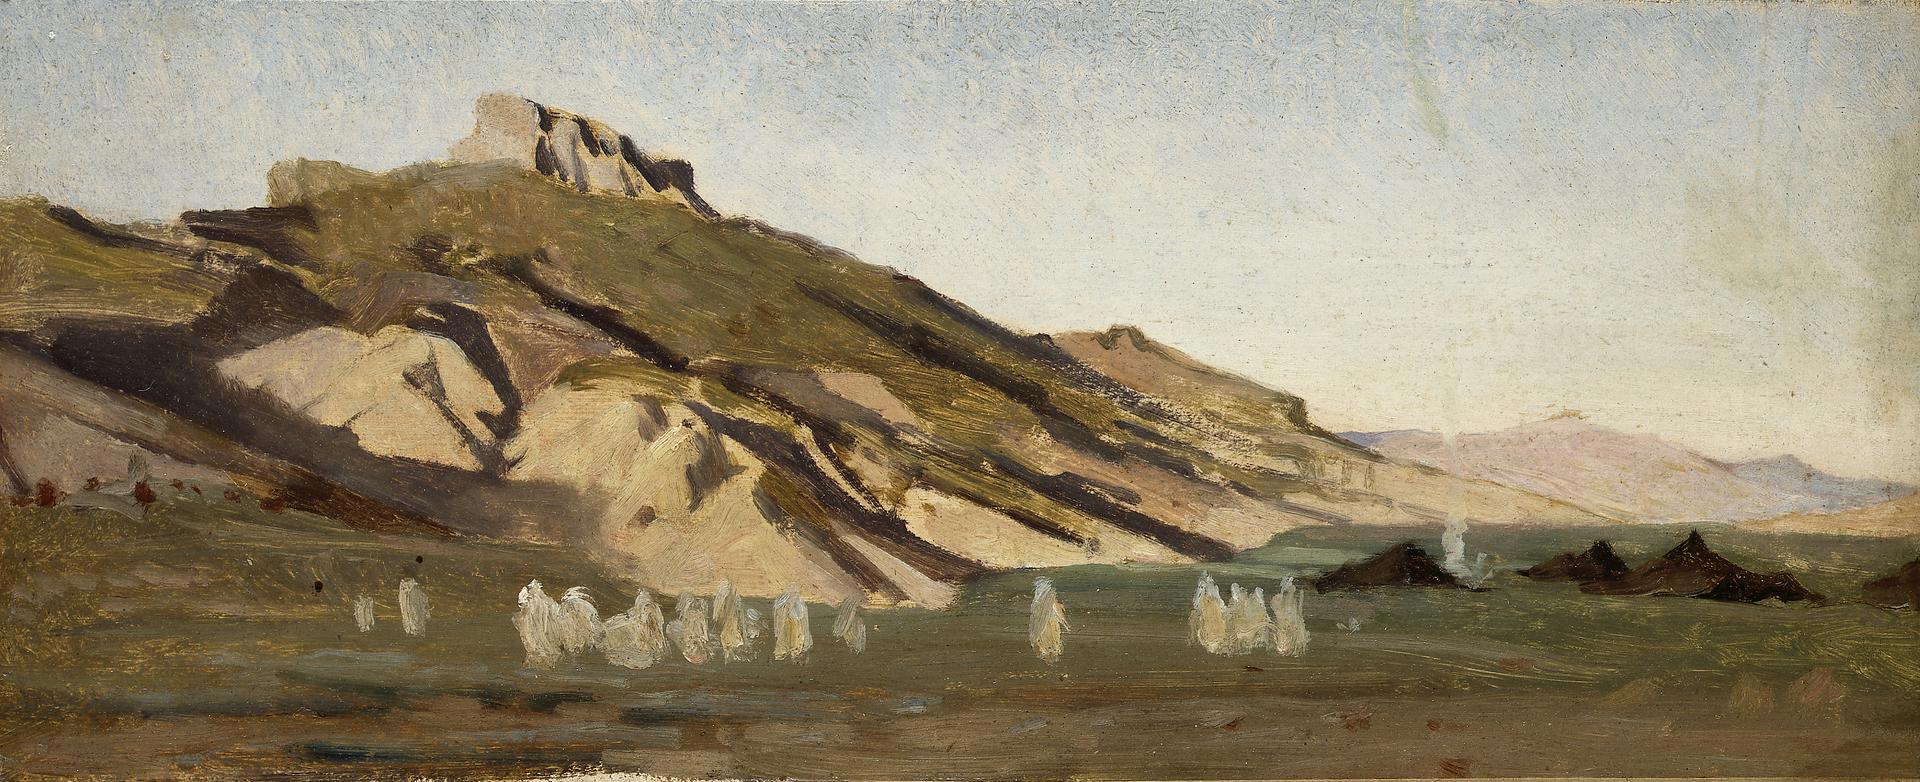 Mountains in North Africa, with a Bedouin Camp by Gustave Guillaumet